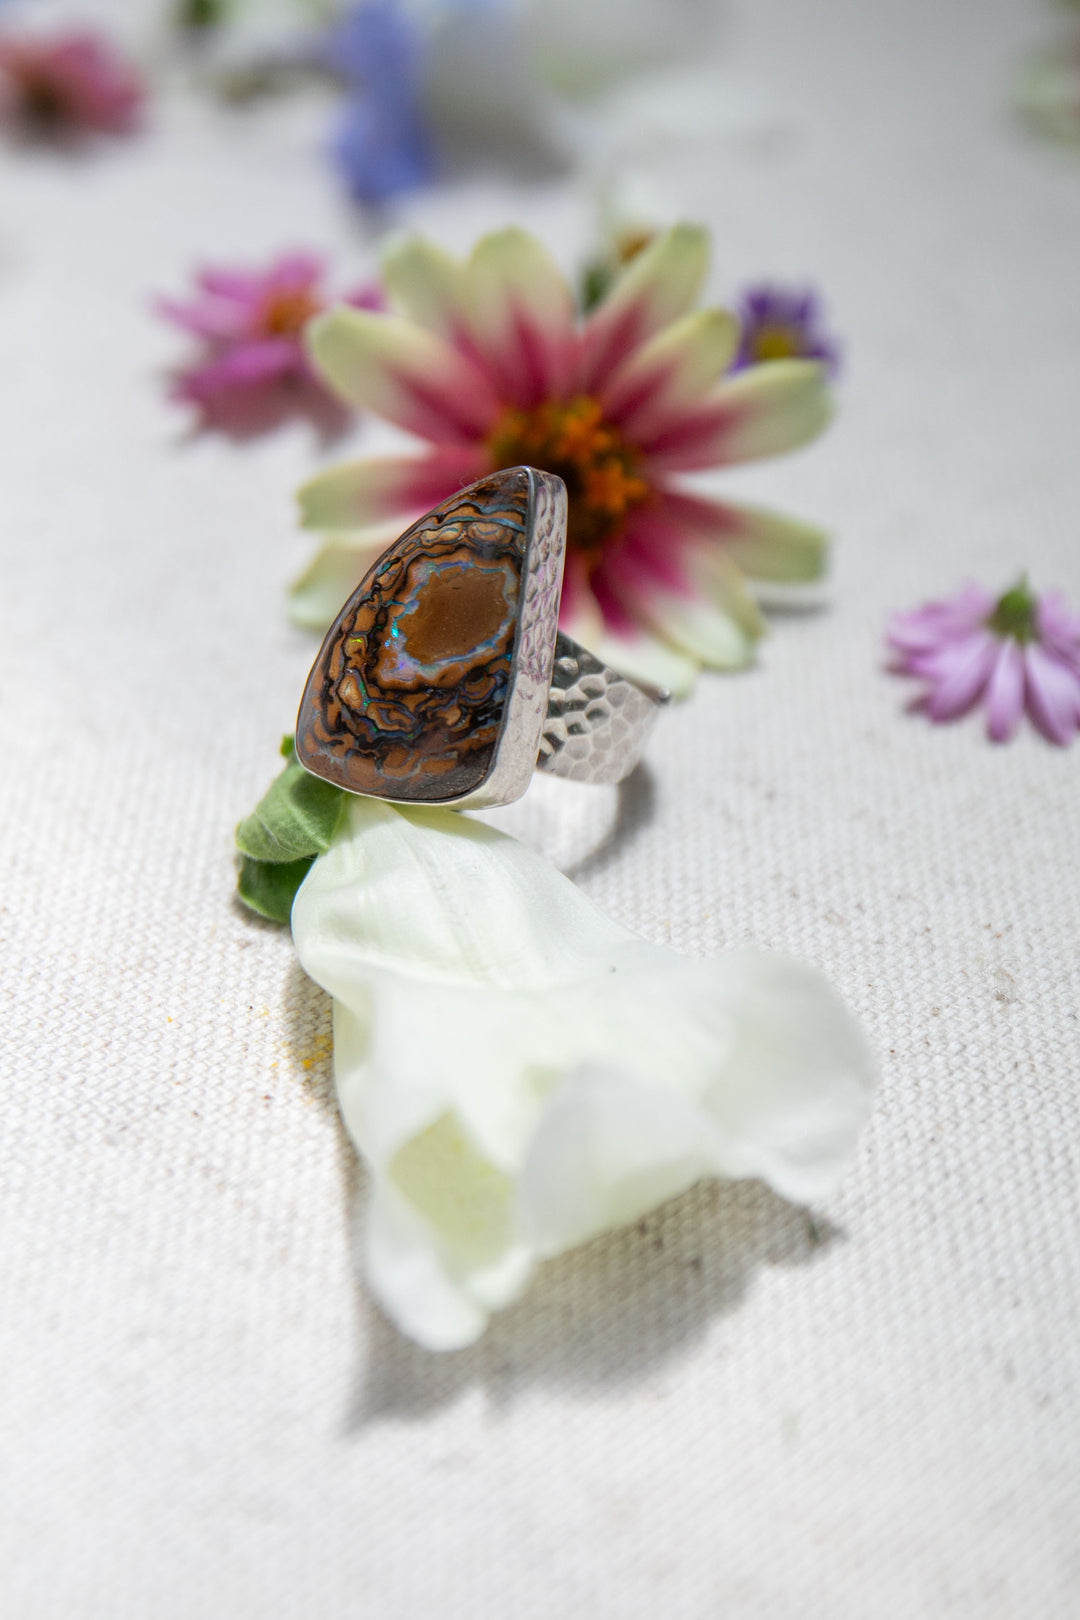 Organic Boulder Opal Ring with Beaten Sterling Silver Setting with Adjustable Style Band